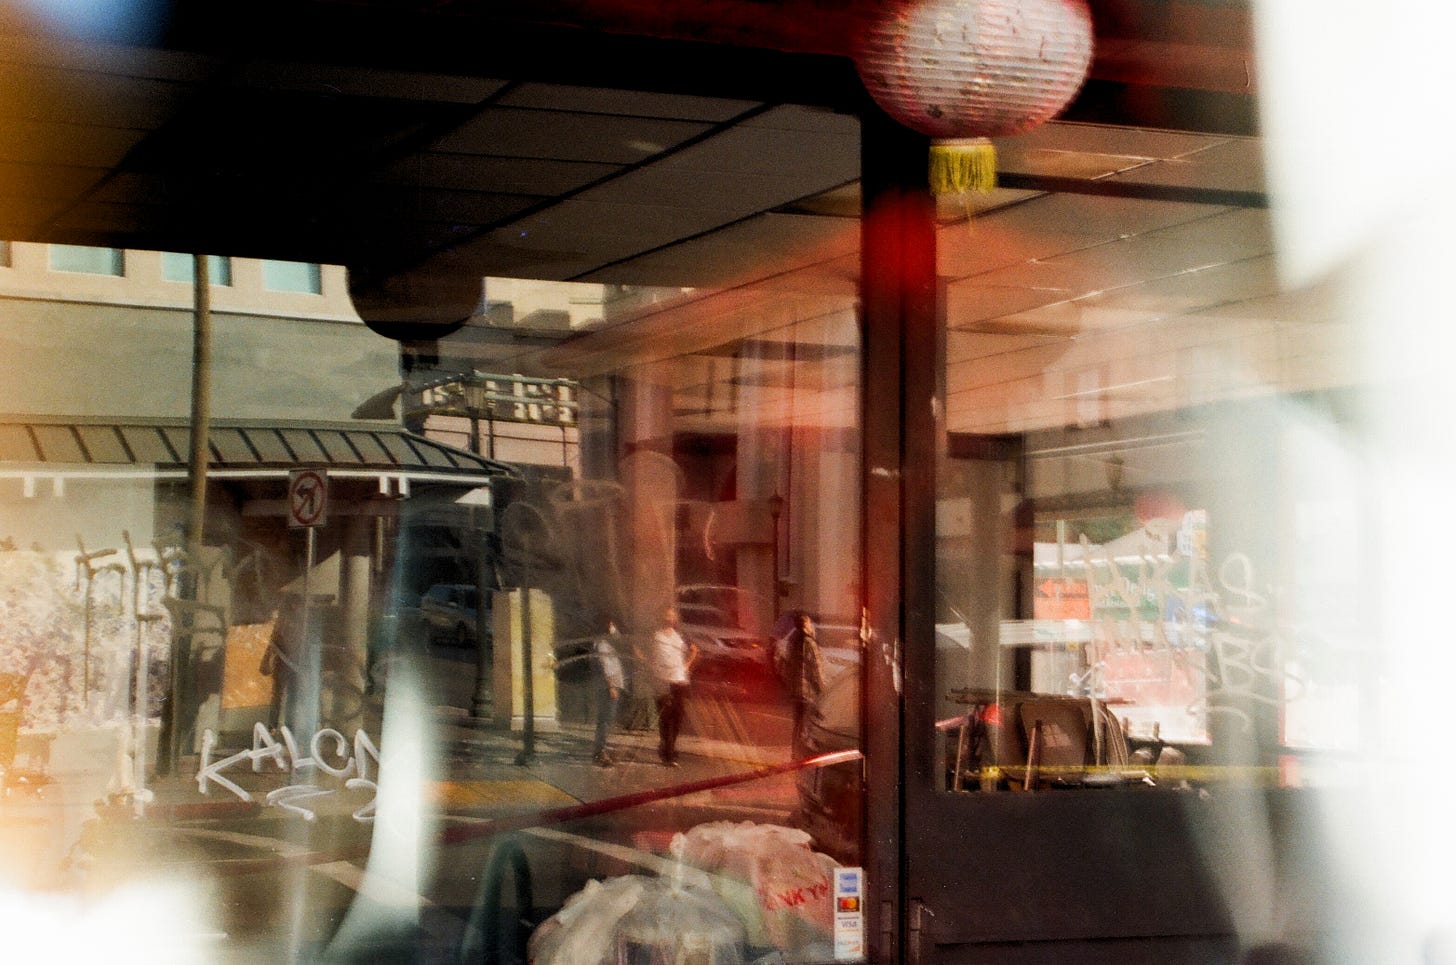 Colorful photo of Oakland Chinatown's storefront with people reflected in window.